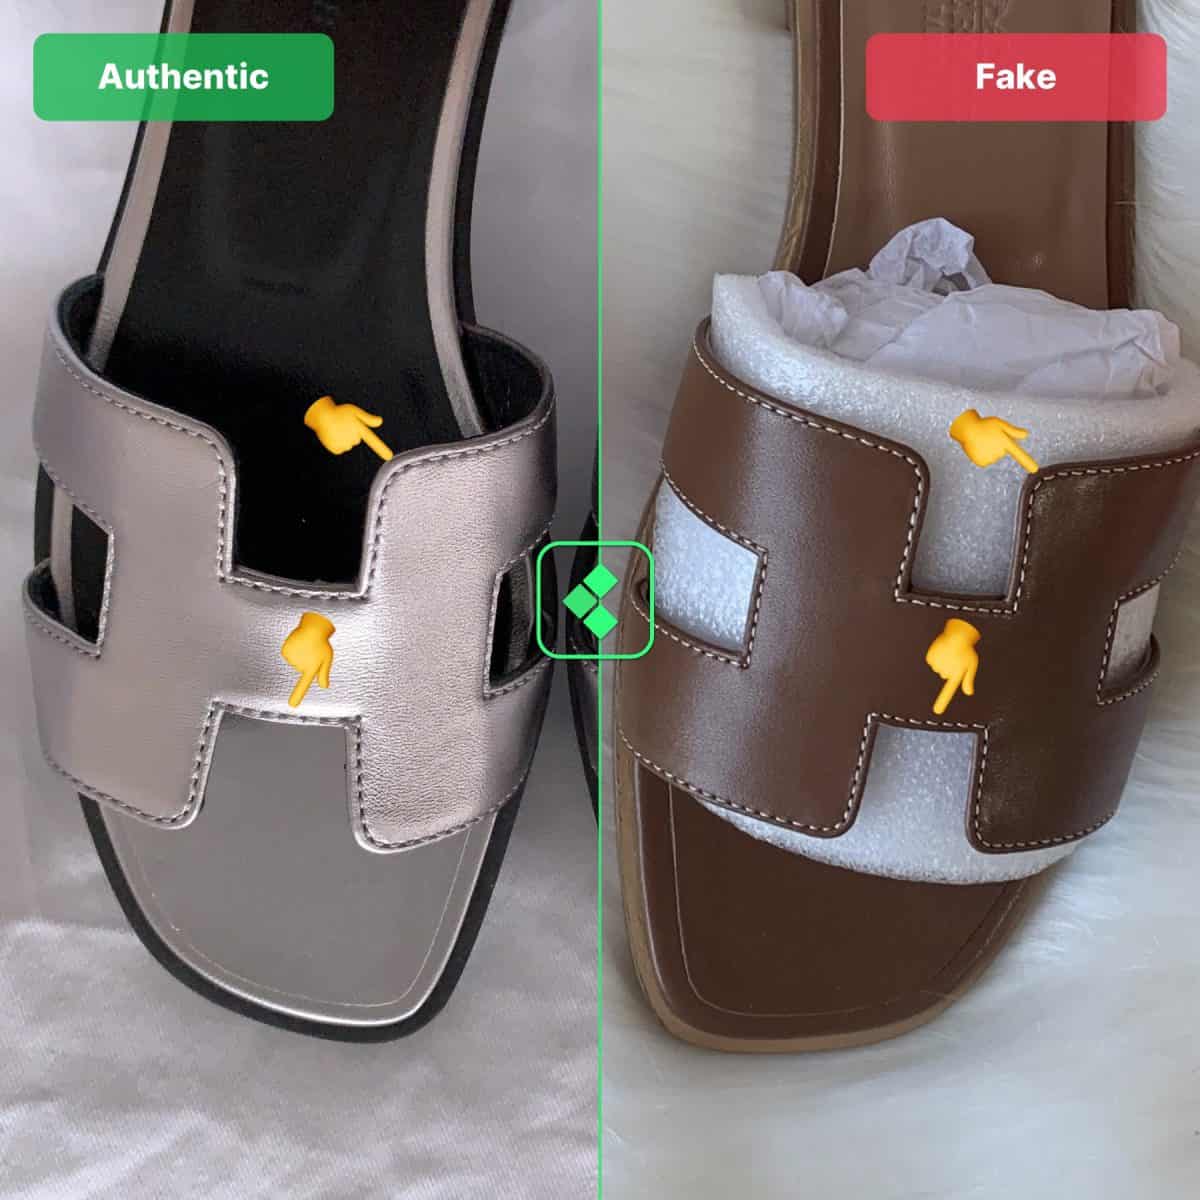 How to Spot Fake Hermes Sandals 